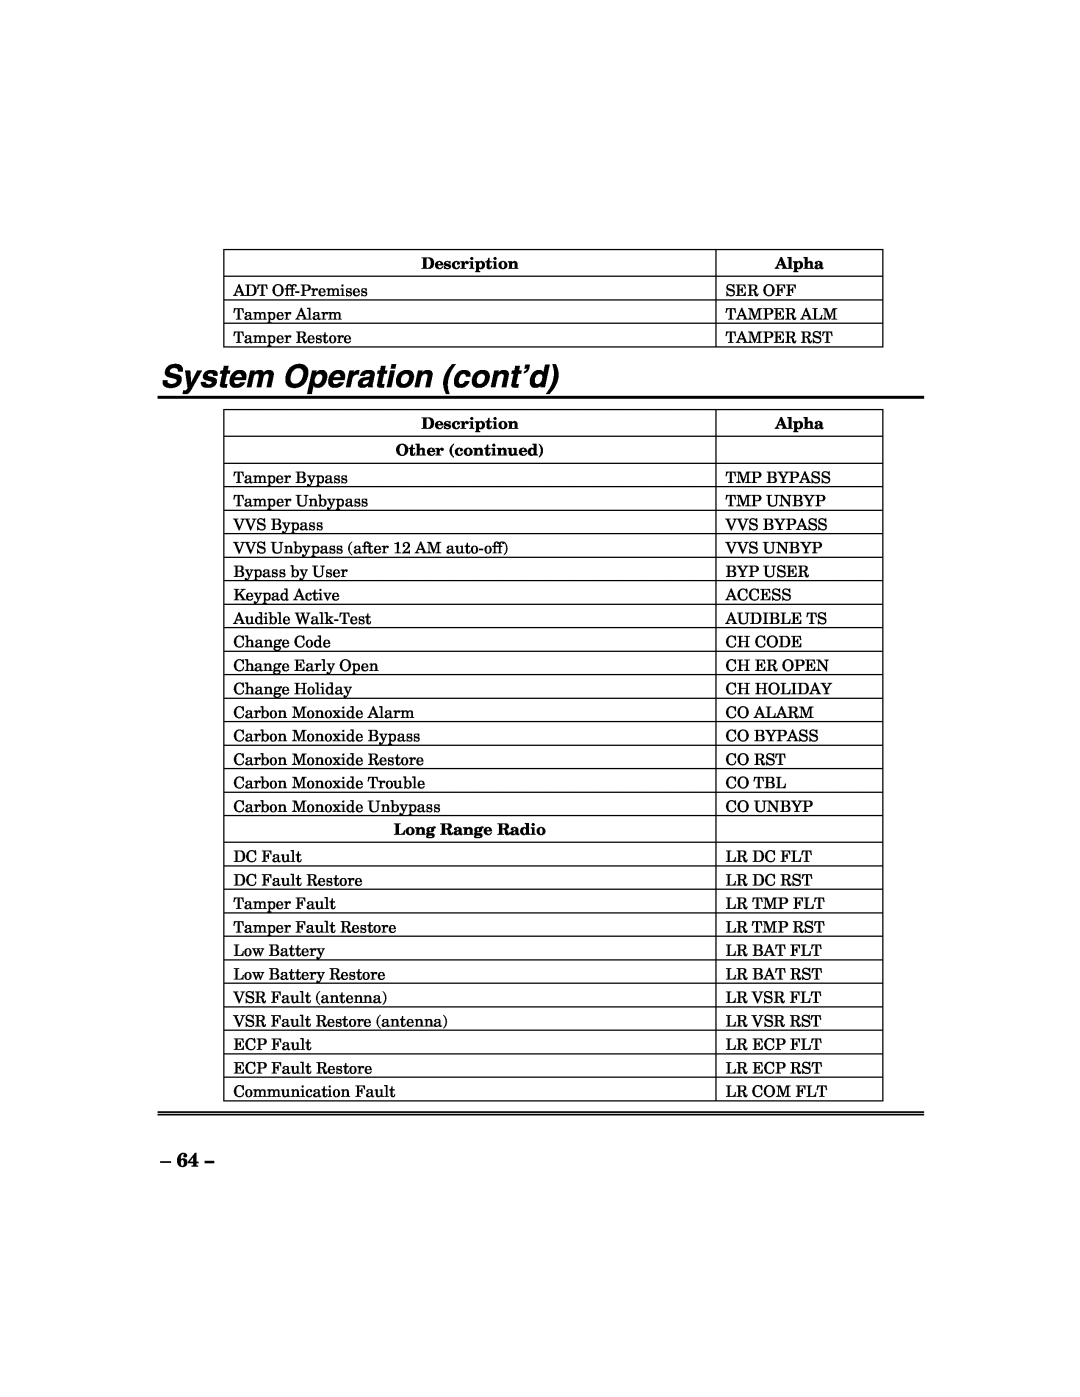 ADT Security Services 200 Plus manual System Operation cont’d, Description, Alpha, Other continued, Long Range Radio 